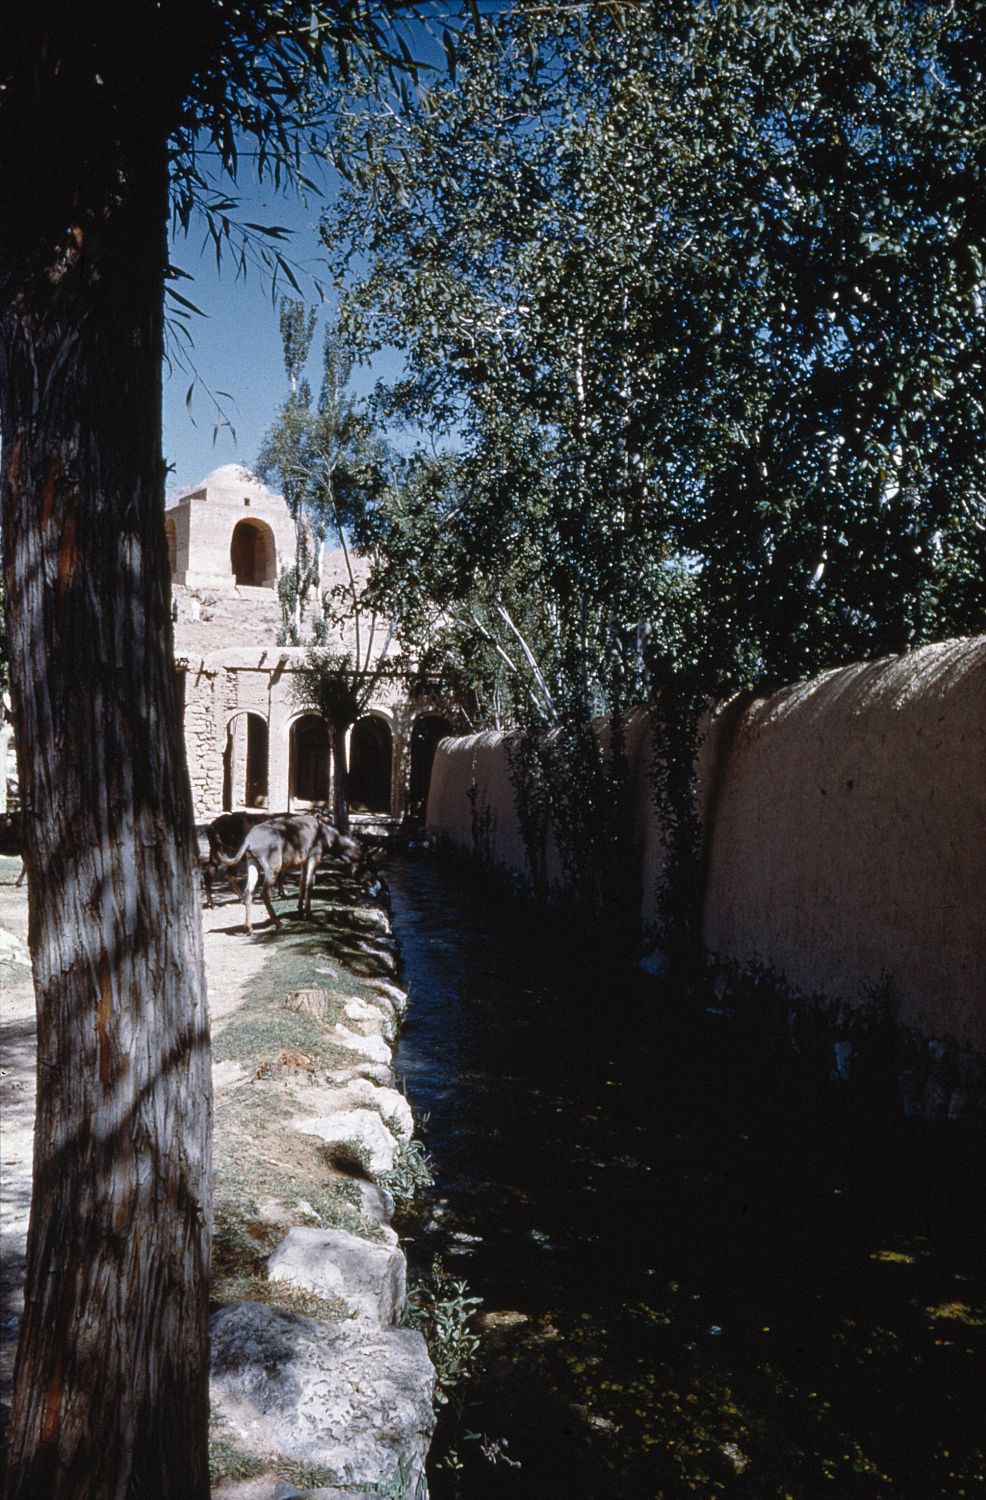 View along water channel toward spring.